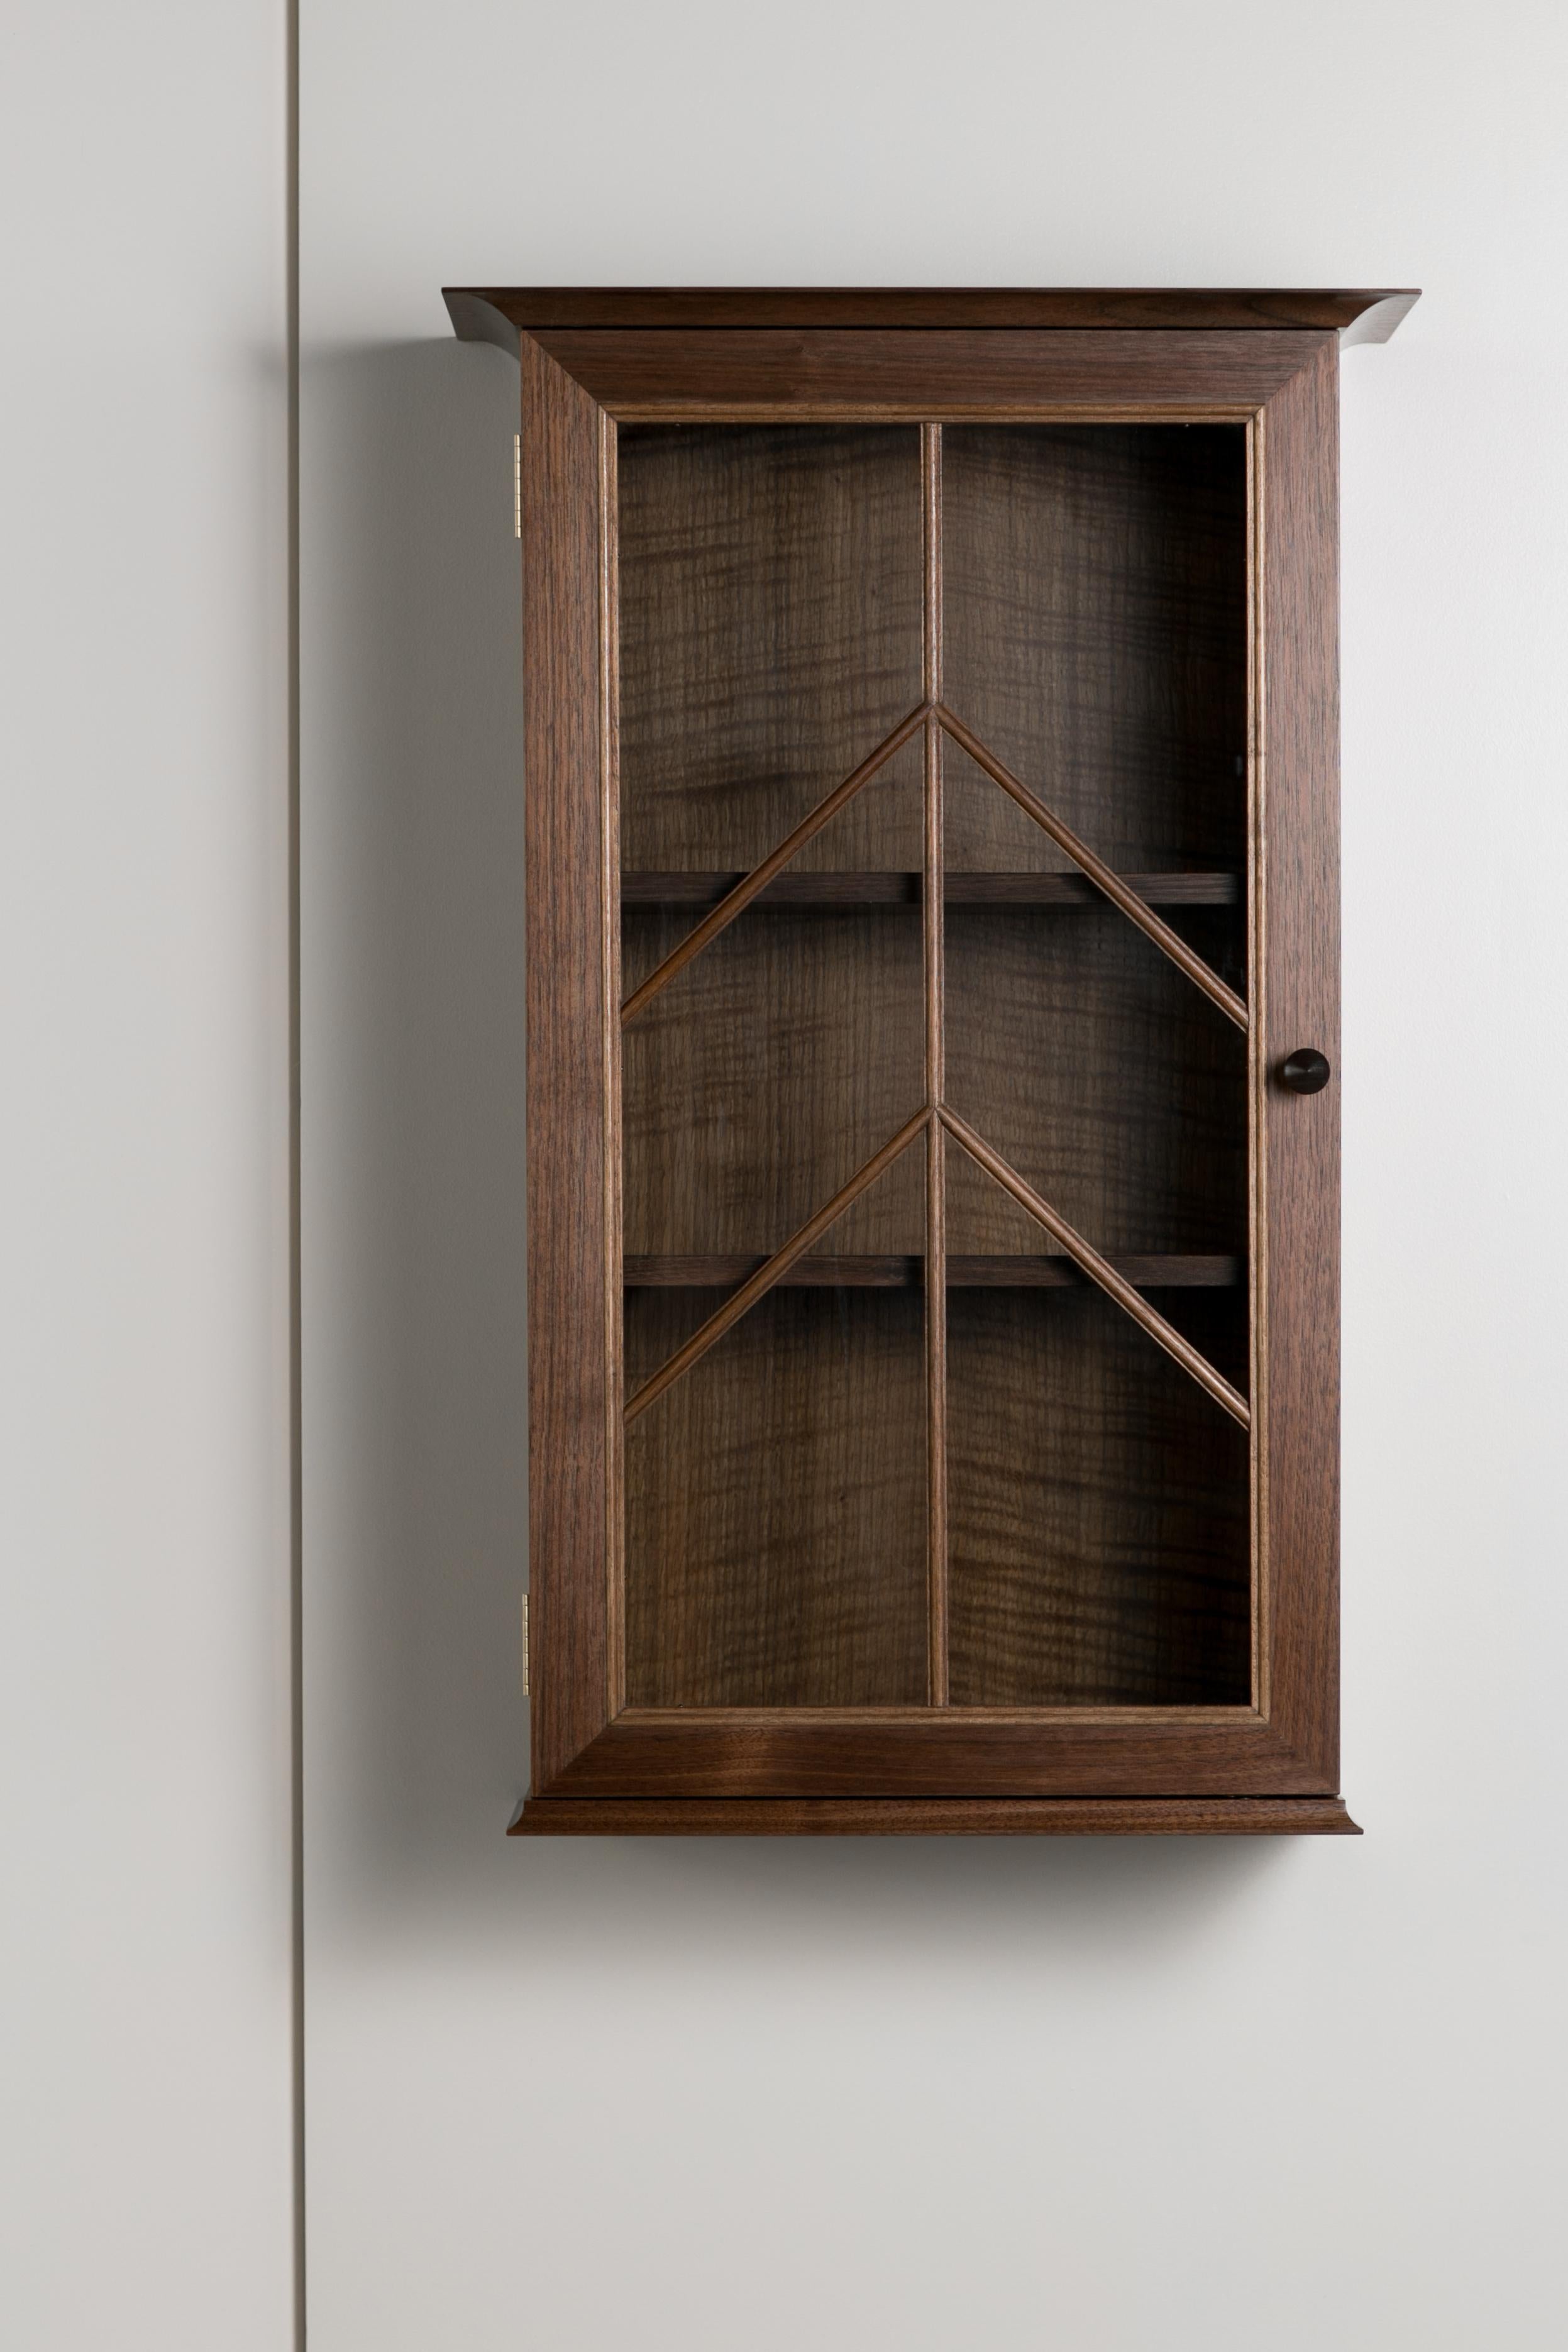 The North end wall cabinet is clean, contemporary piece with traditional elements including a molding pattern unique to Meredith Hart furniture over the glass door. Deep enough to hold wine and liquor bottles and glasses but versatile enough to hold